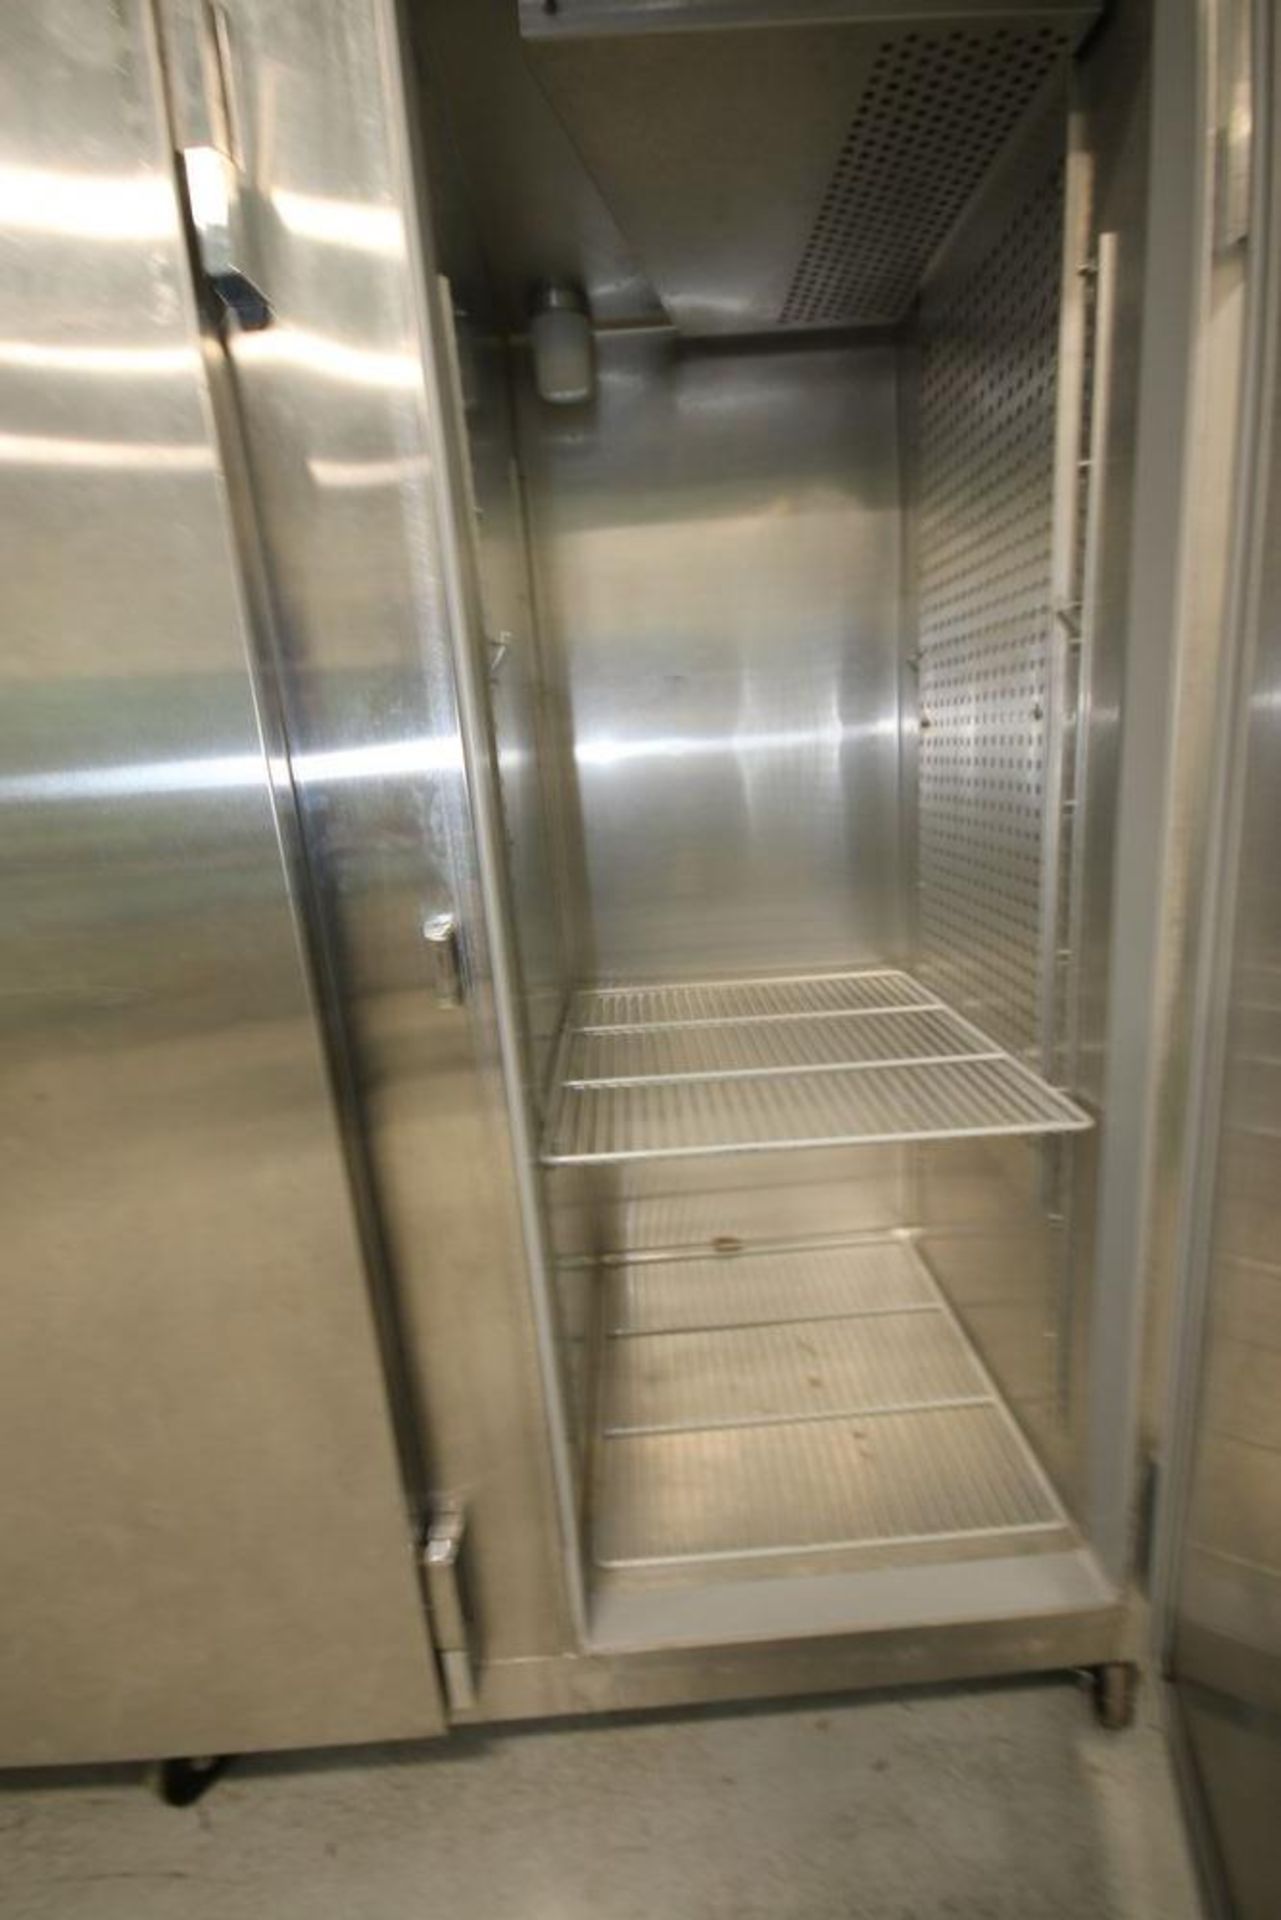 Continental Triple Door S/S Refrigerator, Mounted on Casters, Overall Dims.: Aprox. 84" L x 36" W - Image 5 of 6